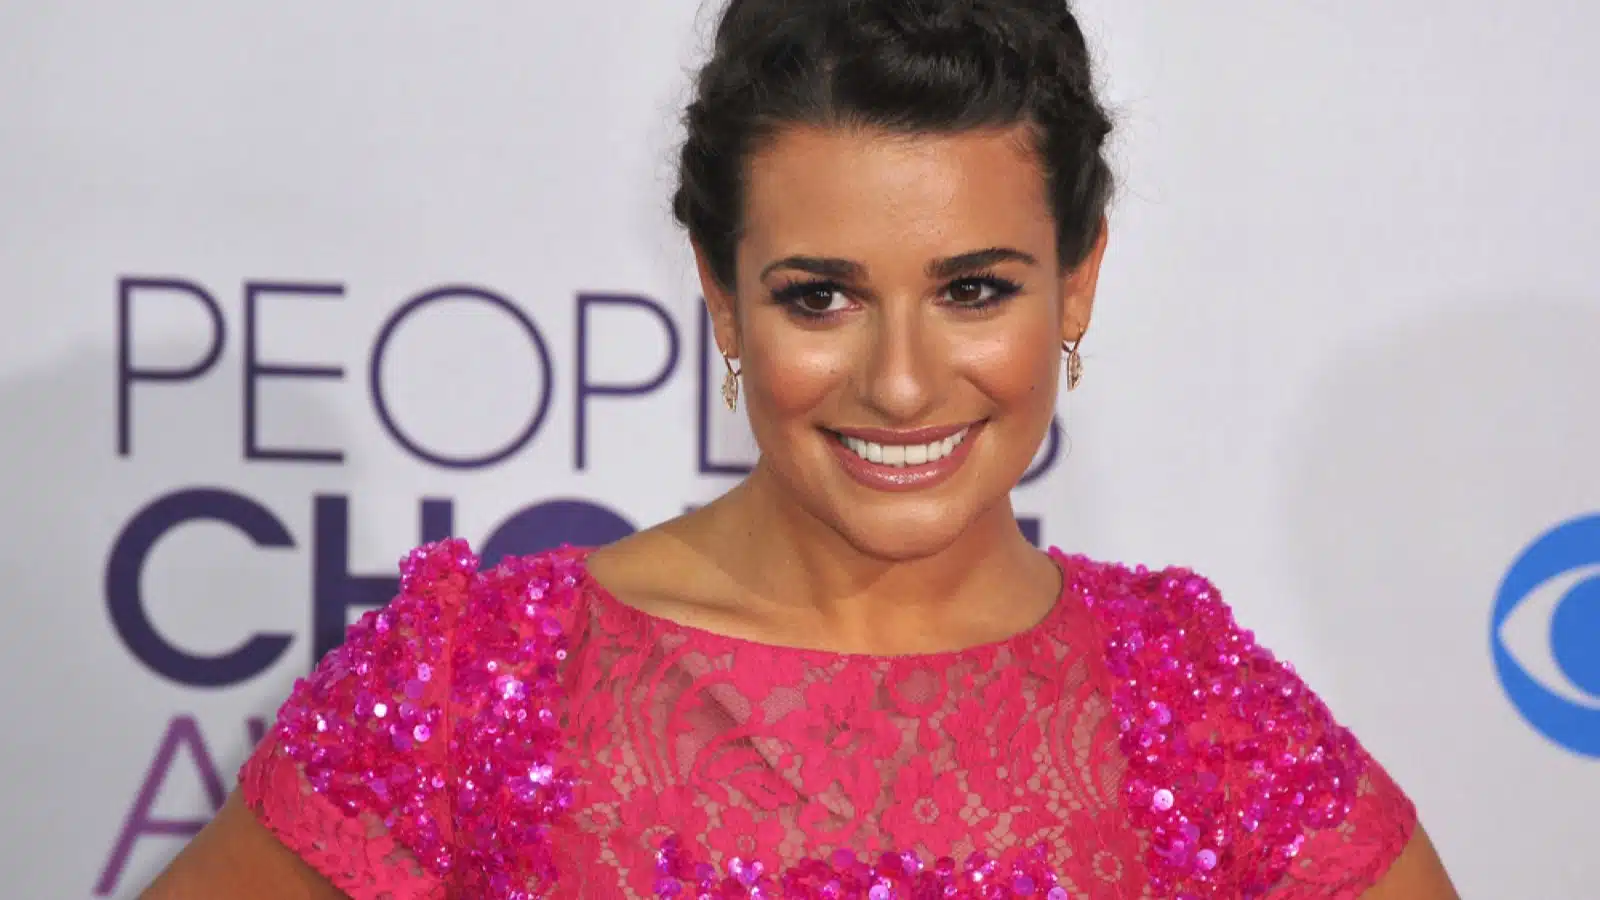 Lea Michele at the People's Choice Awards 2013 at the Nokia Theatre L.A. Live. January 9, 2013 Los Angeles, CA Picture: Paul Smith